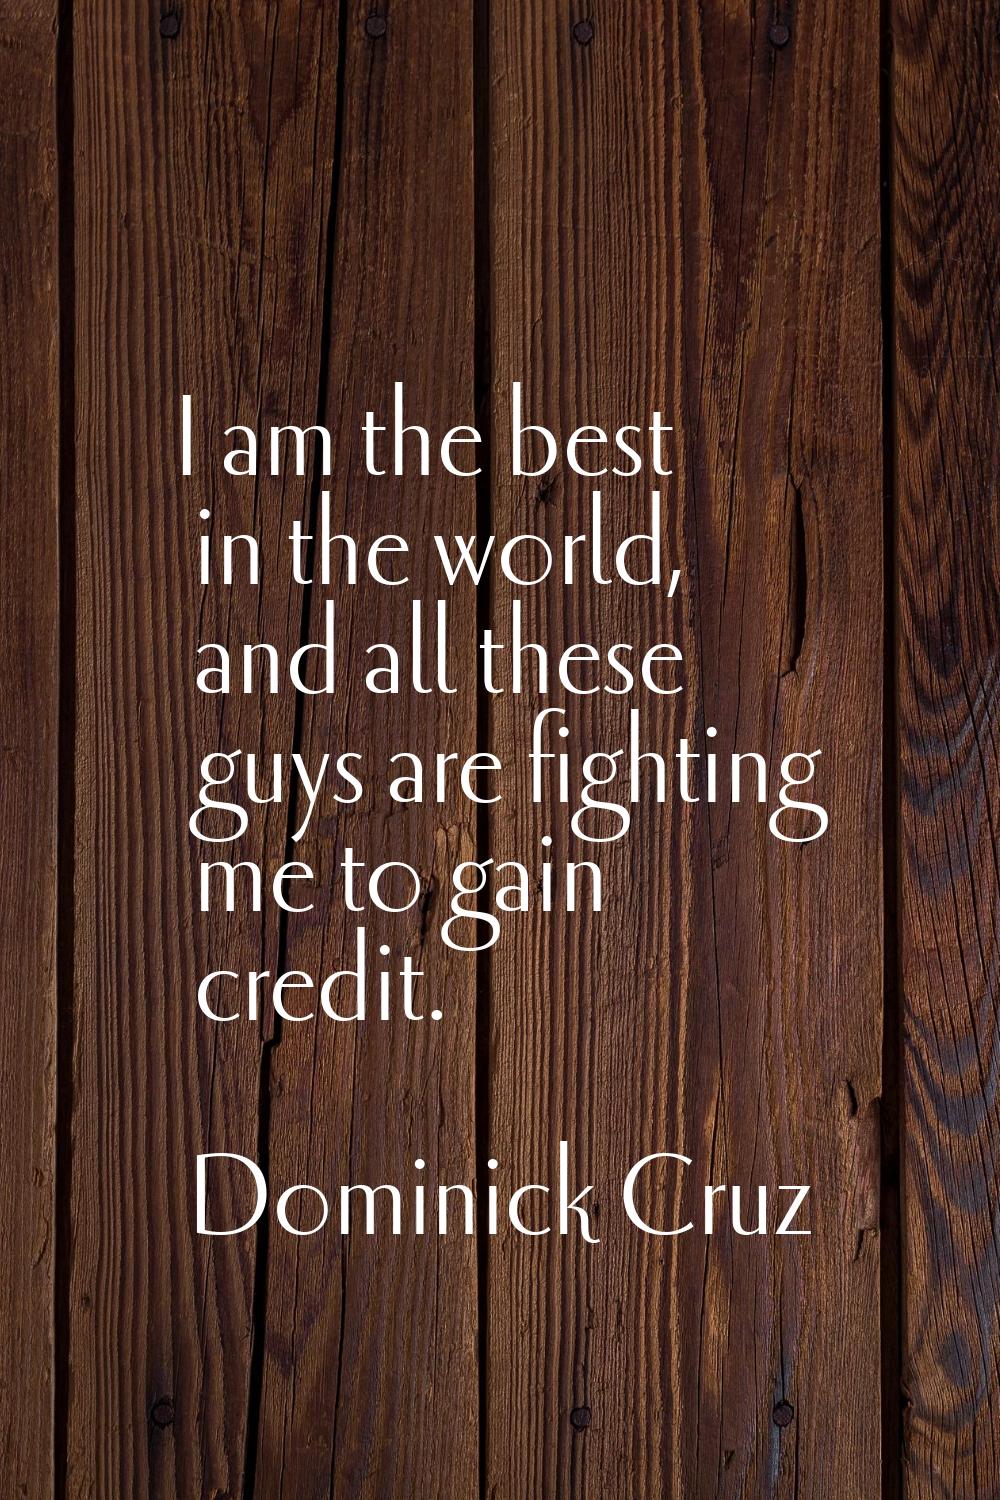 I am the best in the world, and all these guys are fighting me to gain credit.